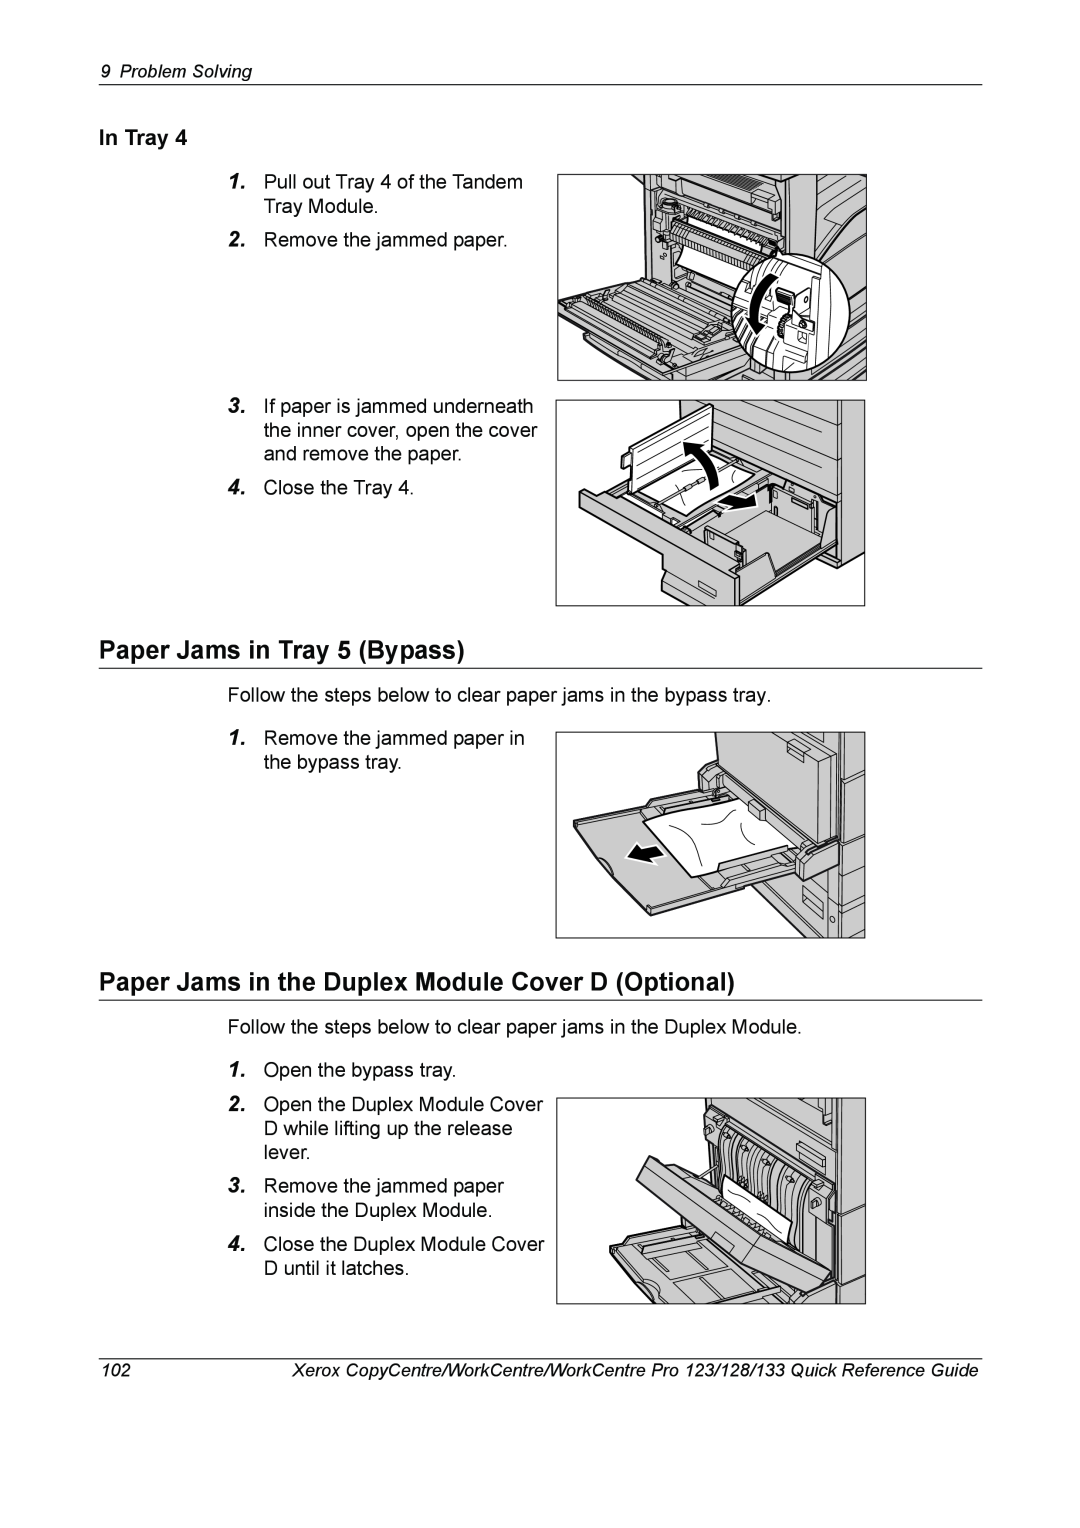 Xerox 604P18037 manual Paper Jams in Tray 5 Bypass, Paper Jams in the Duplex Module Cover D Optional, In Tray 